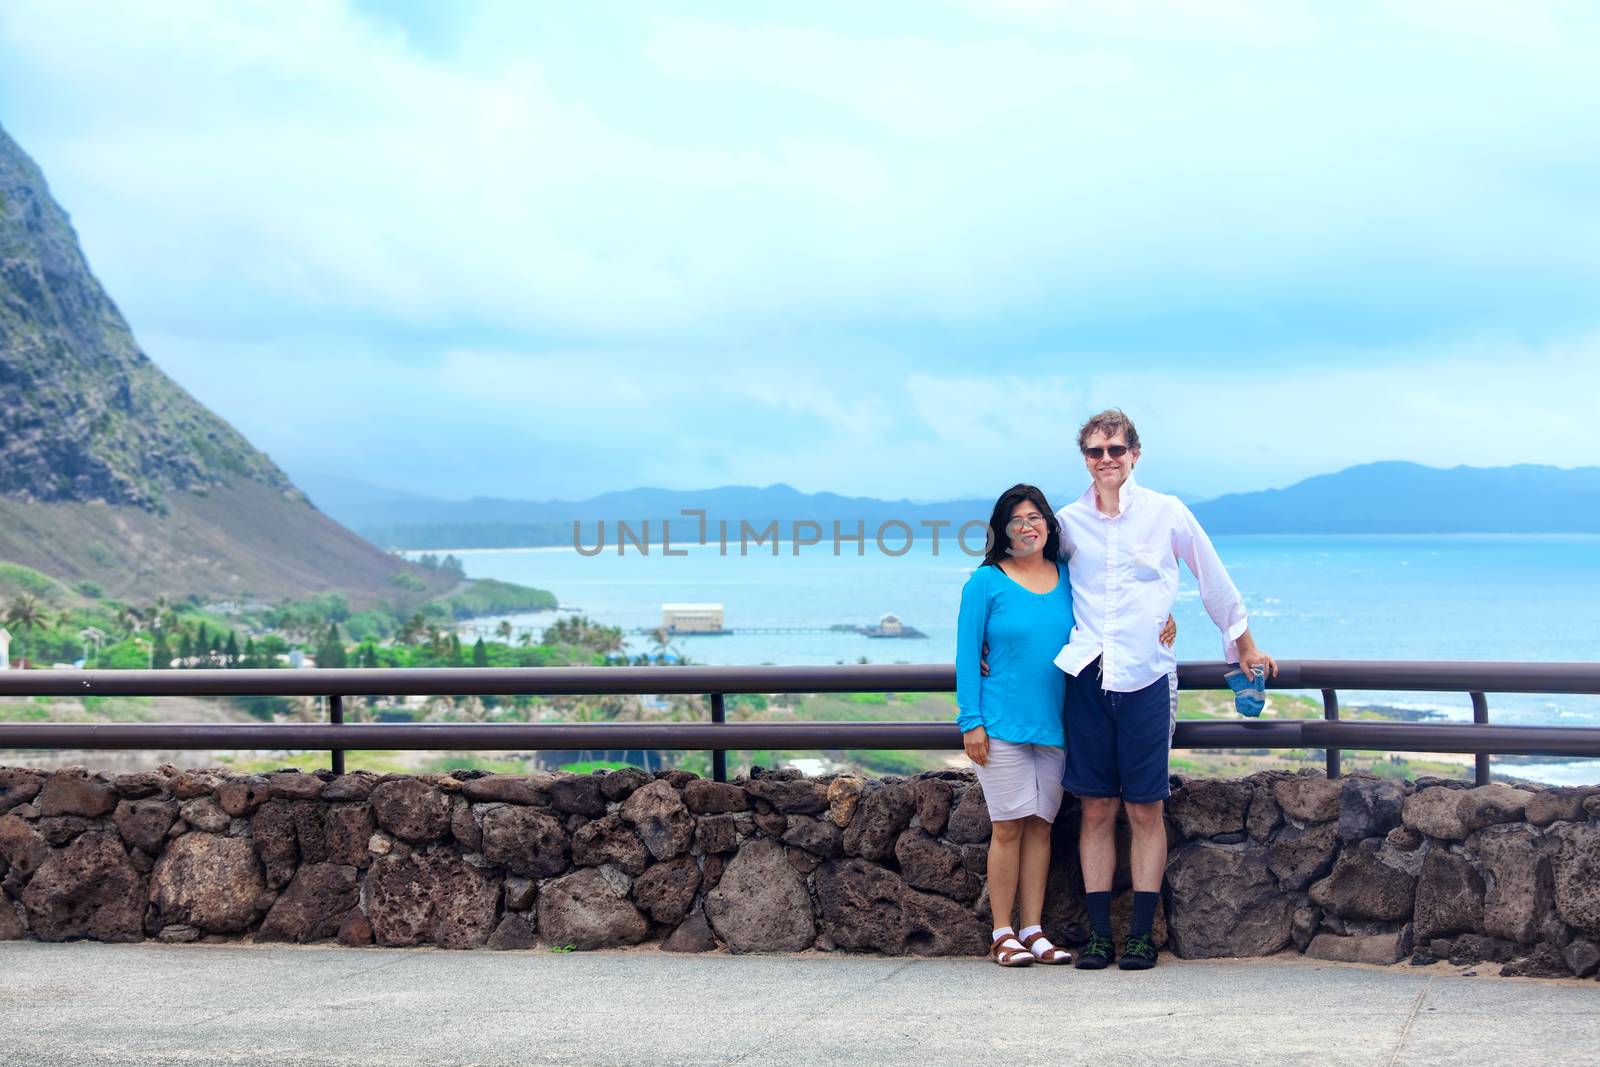 Interracial couple in forties by railing in Hawaii by jarenwicklund